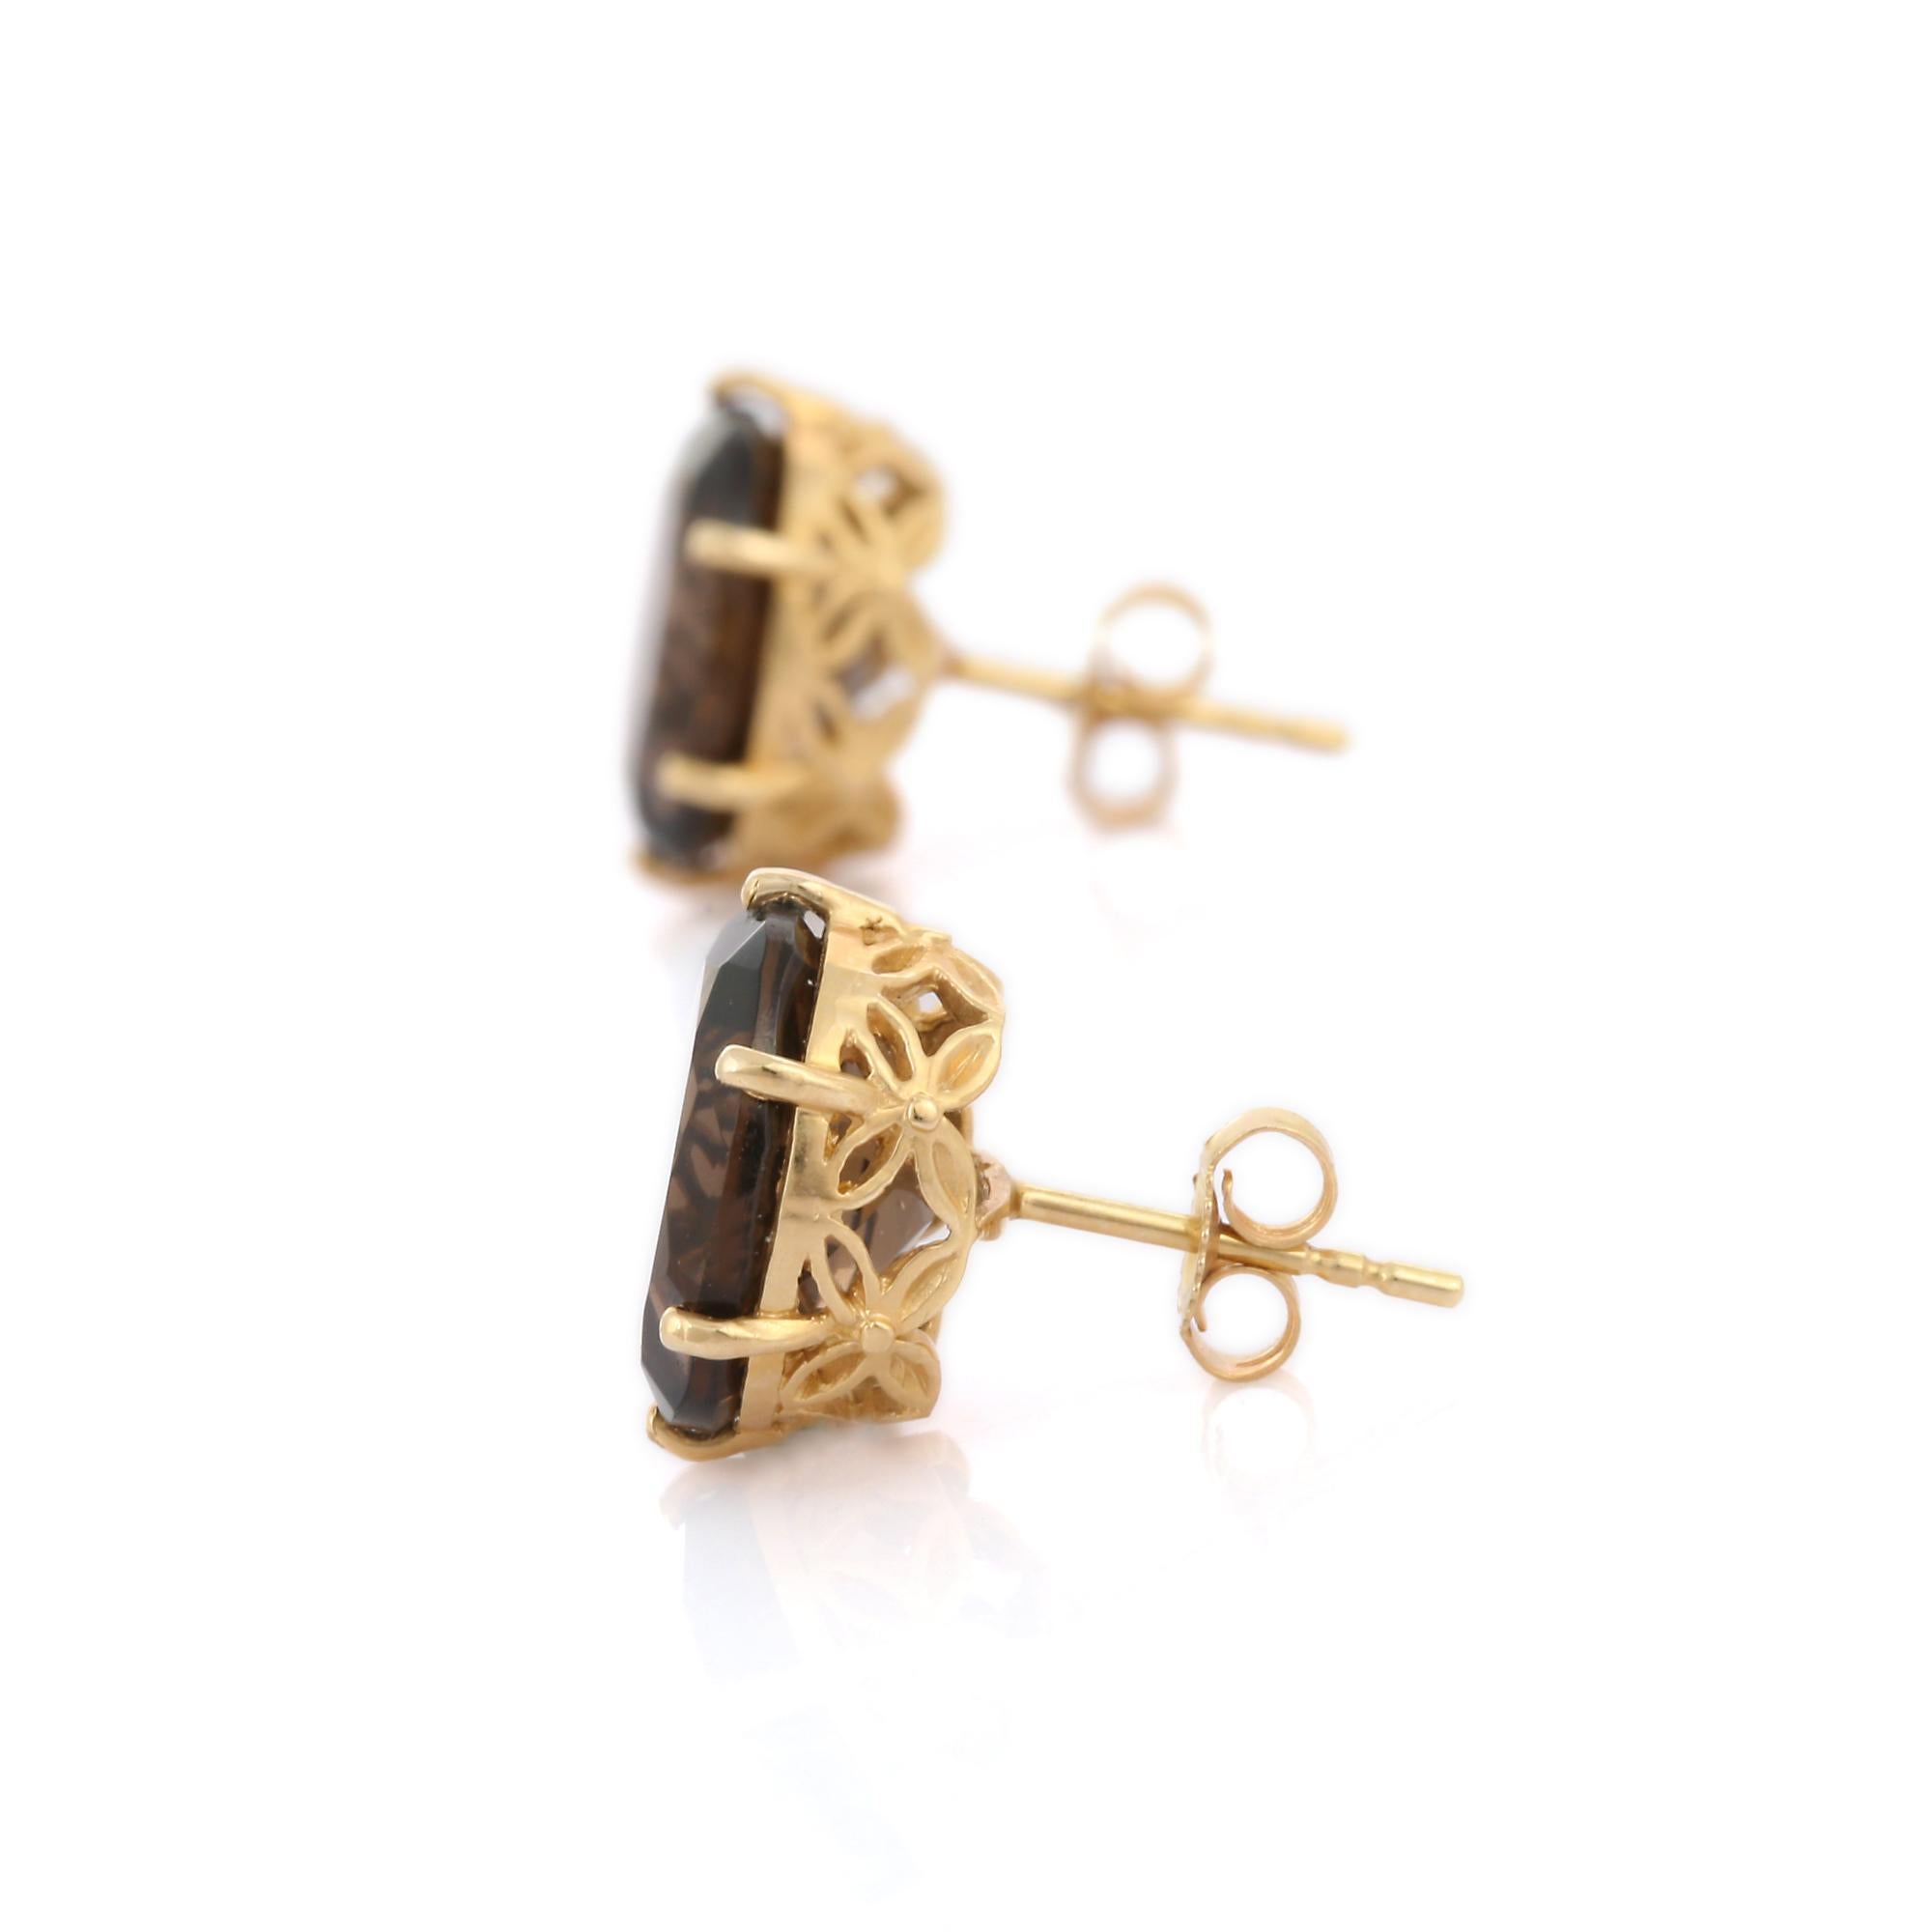 Studs create a subtle beauty while showcasing the colors of the natural precious gemstones.

Oval cut 6.64 ct smoky quartz studs in 14K gold. Embrace your look with these stunning pair of earrings suitable for any occasion to complete your